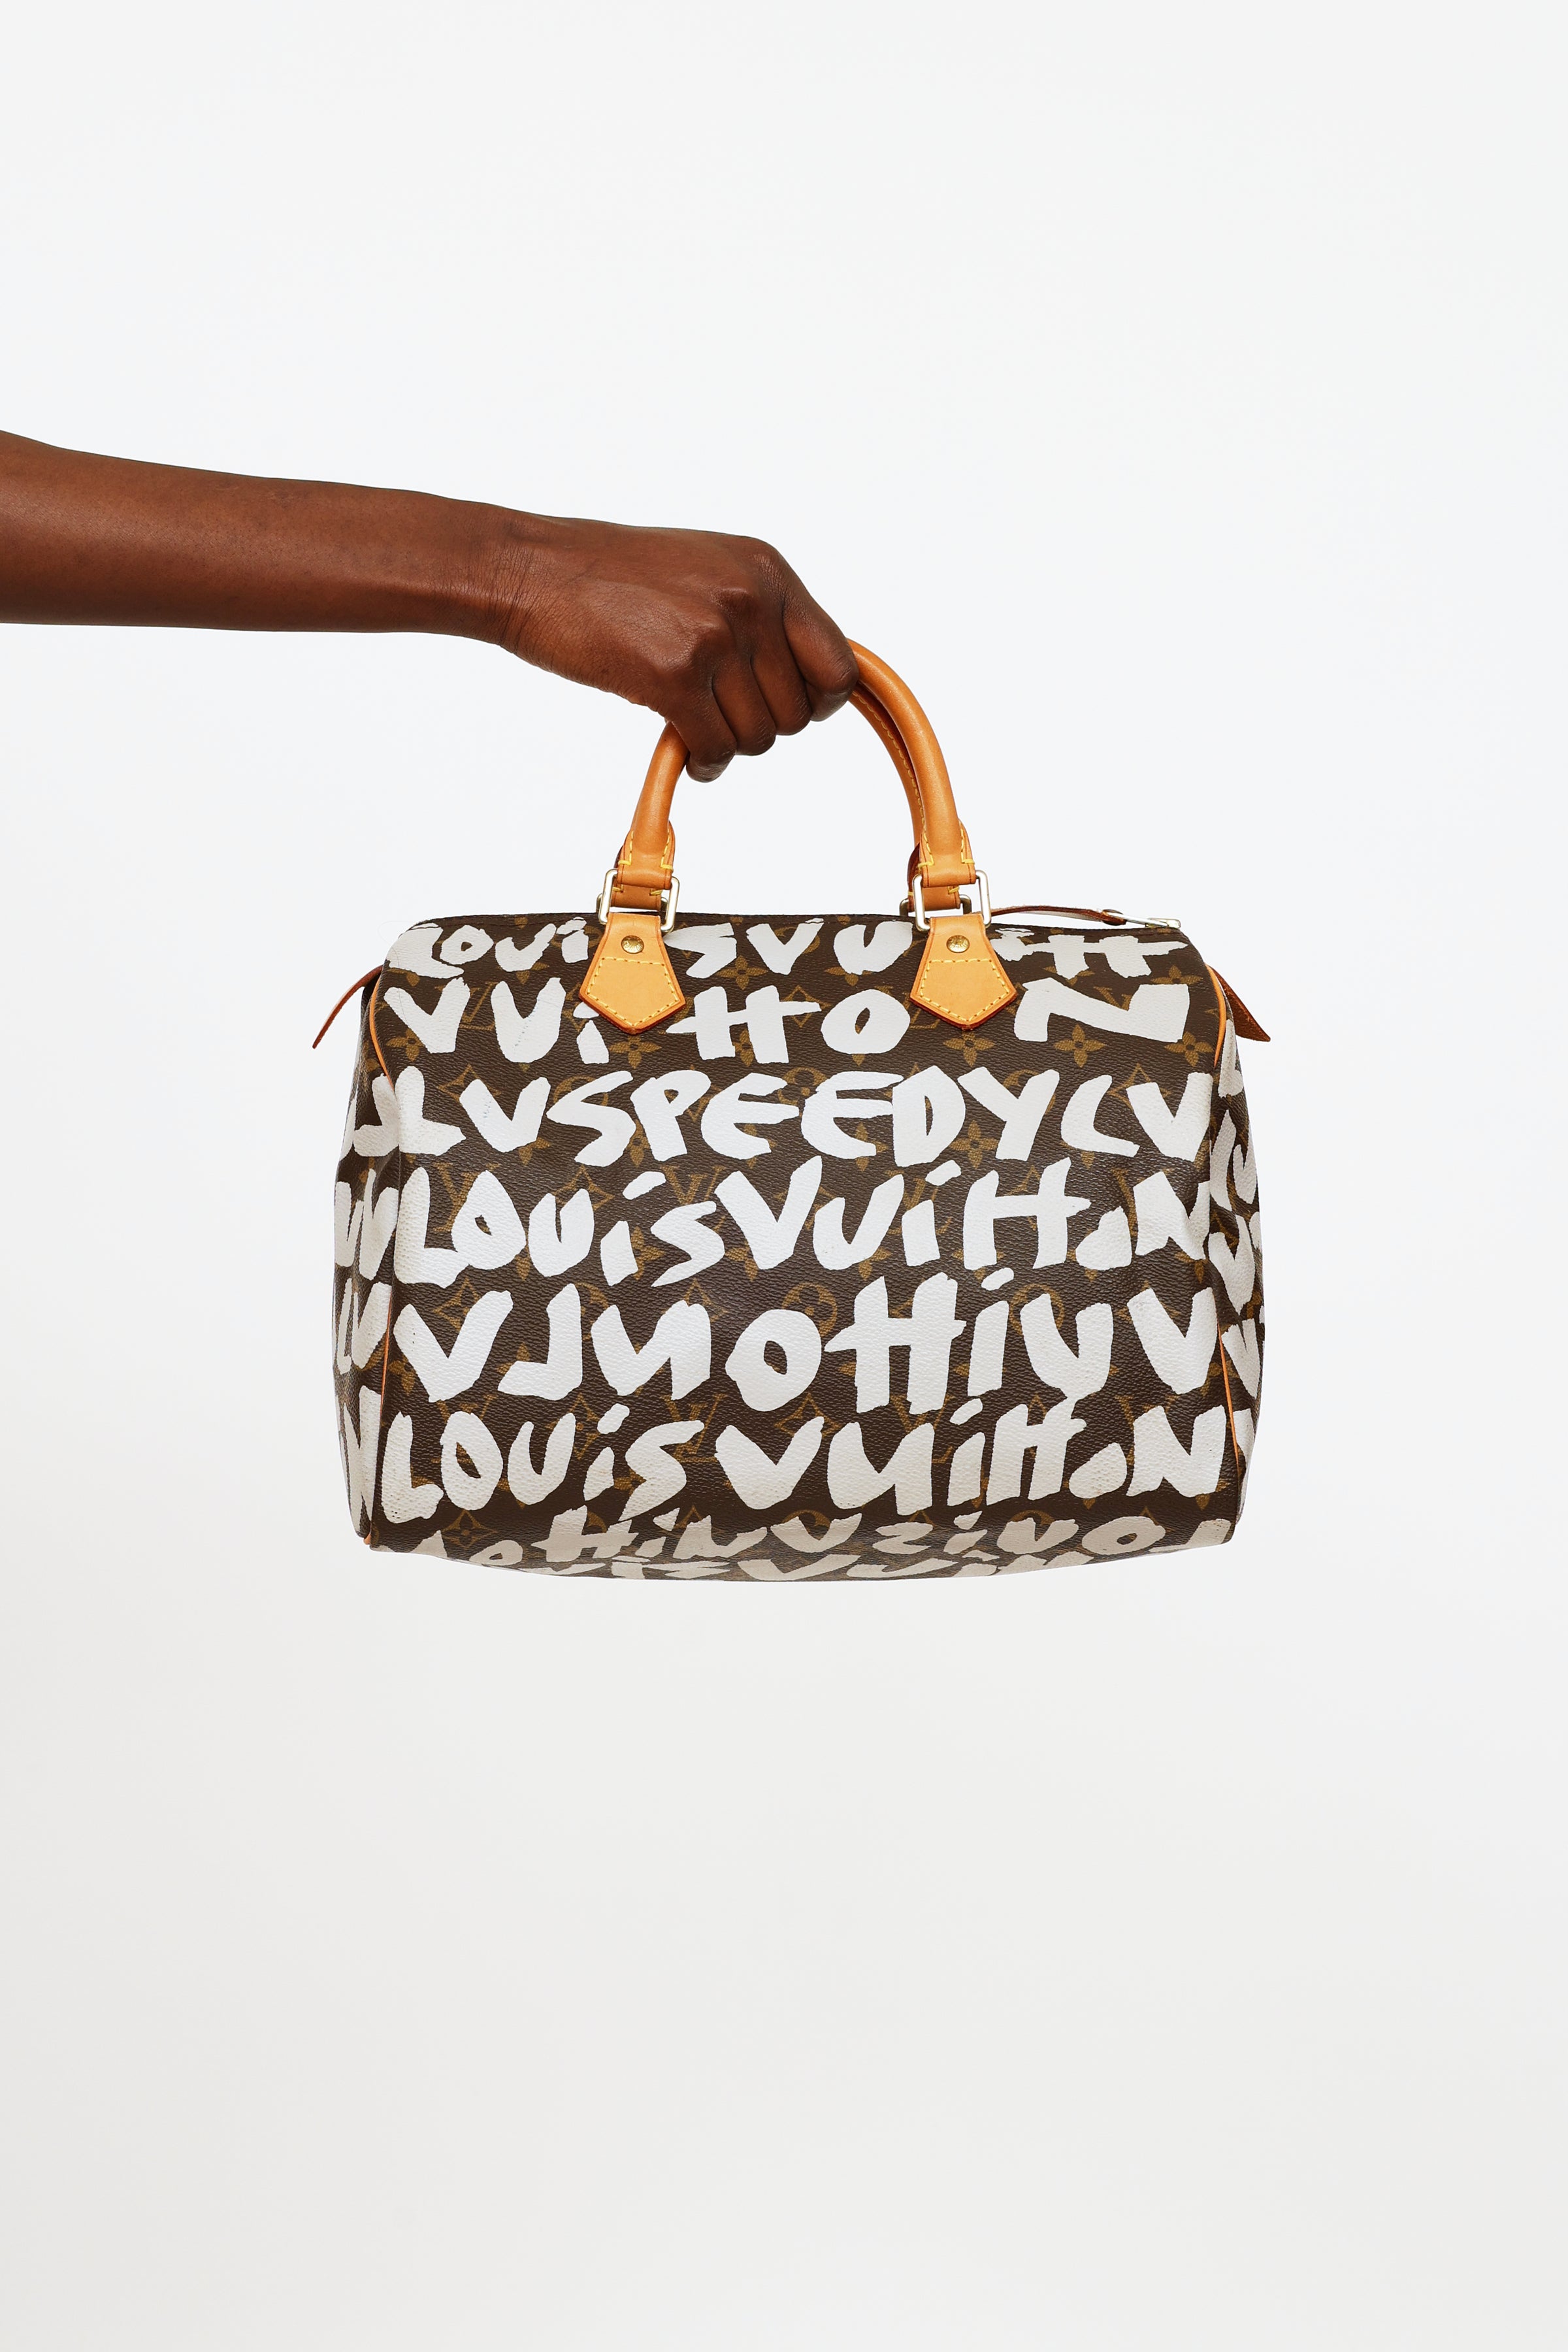 Louis Vuitton Stephen Sprouse Graffiti Mini East West Bag For Sale at  1stDibs